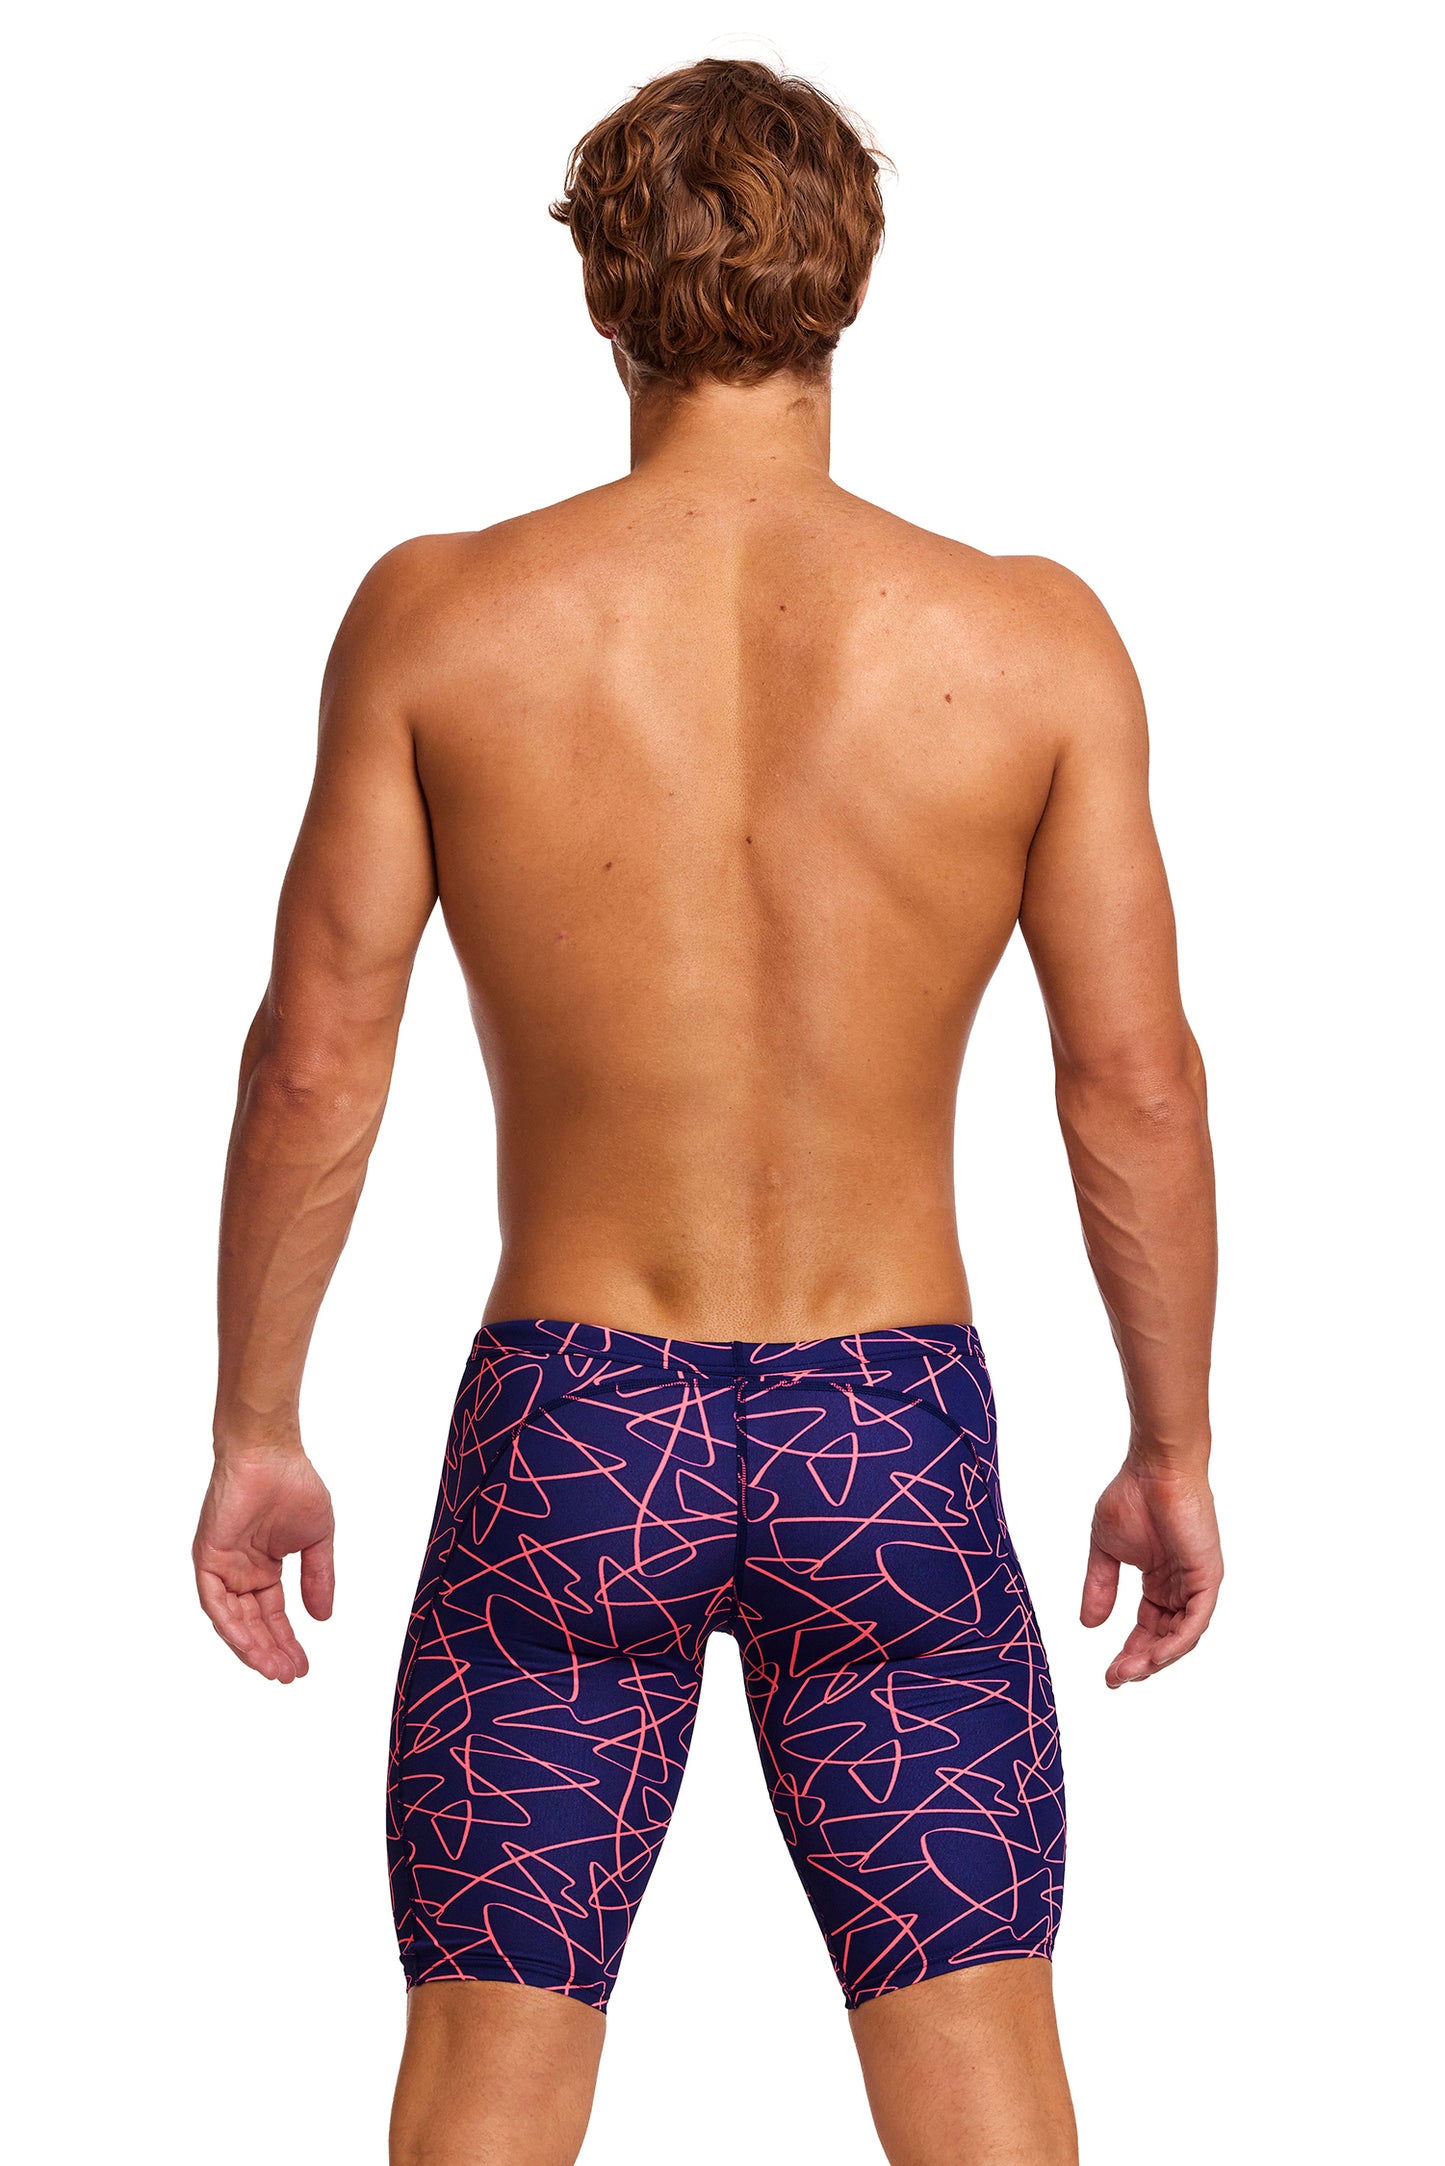 Funky Trunks Mens Training Jammers Serial Texter